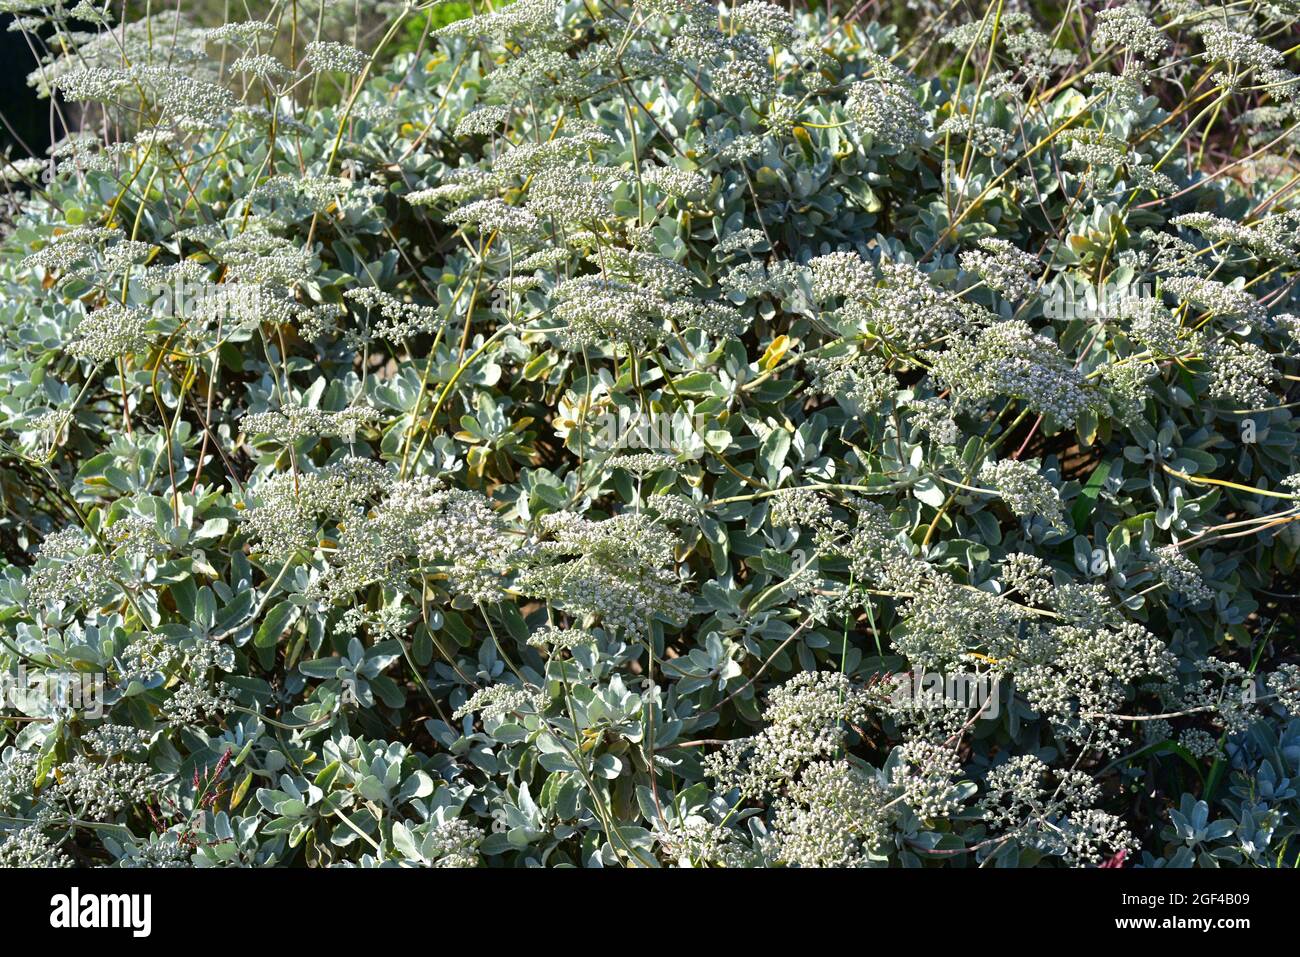 St. Catherine's lace (Eriogonum giganteum) is a shrub endemic to south California, USA. Stock Photo